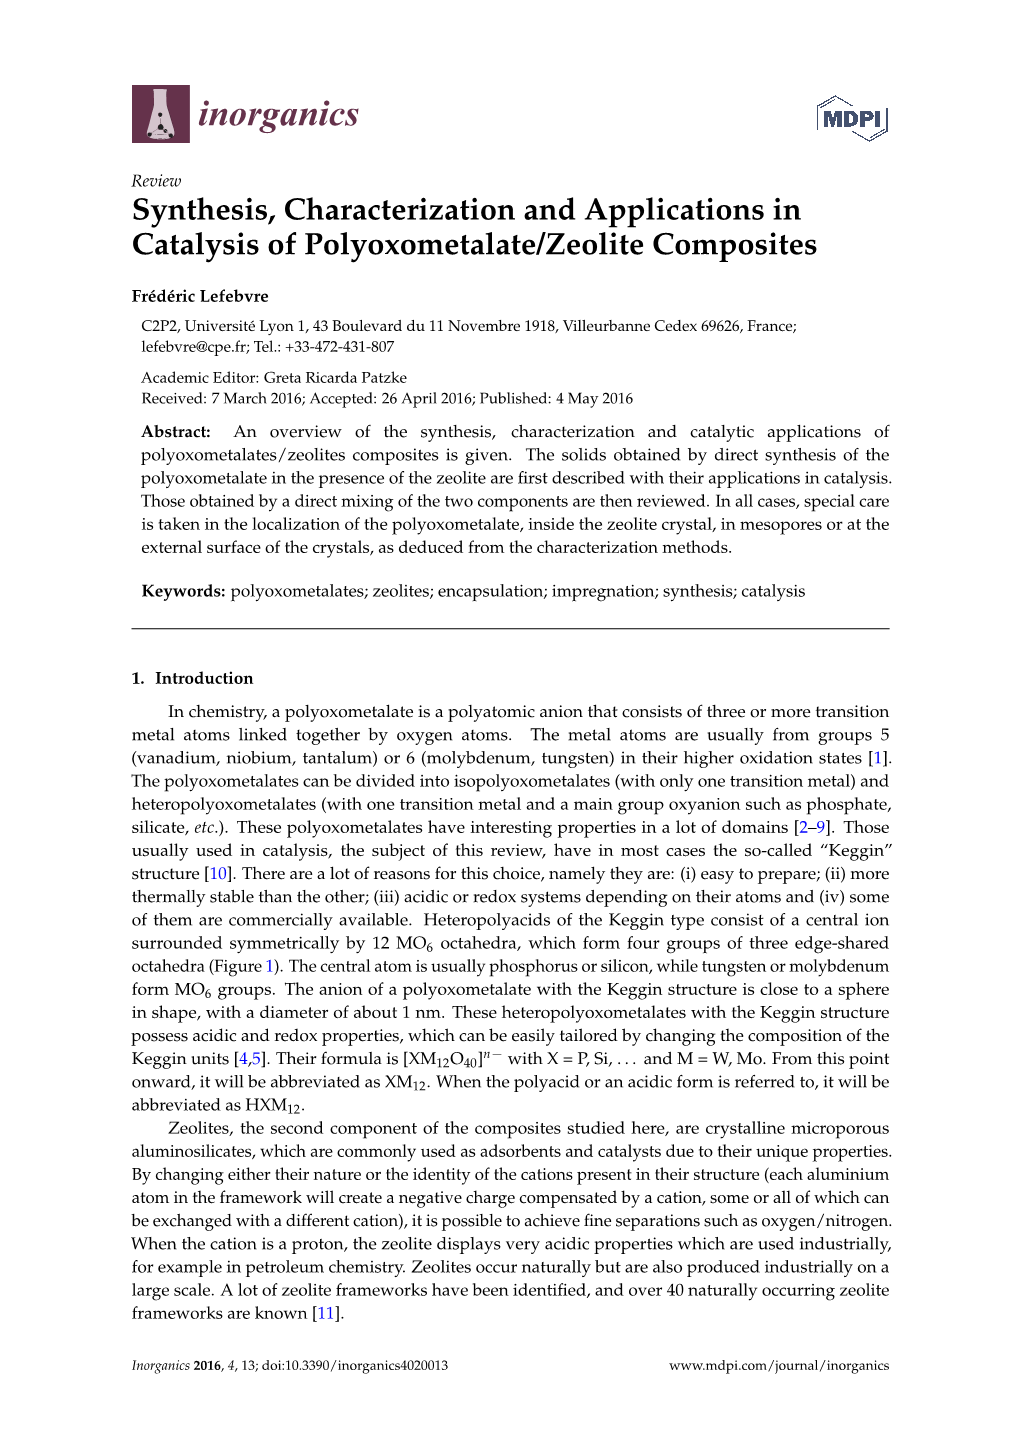 Synthesis, Characterization and Applications in Catalysis of Polyoxometalate/Zeolite Composites